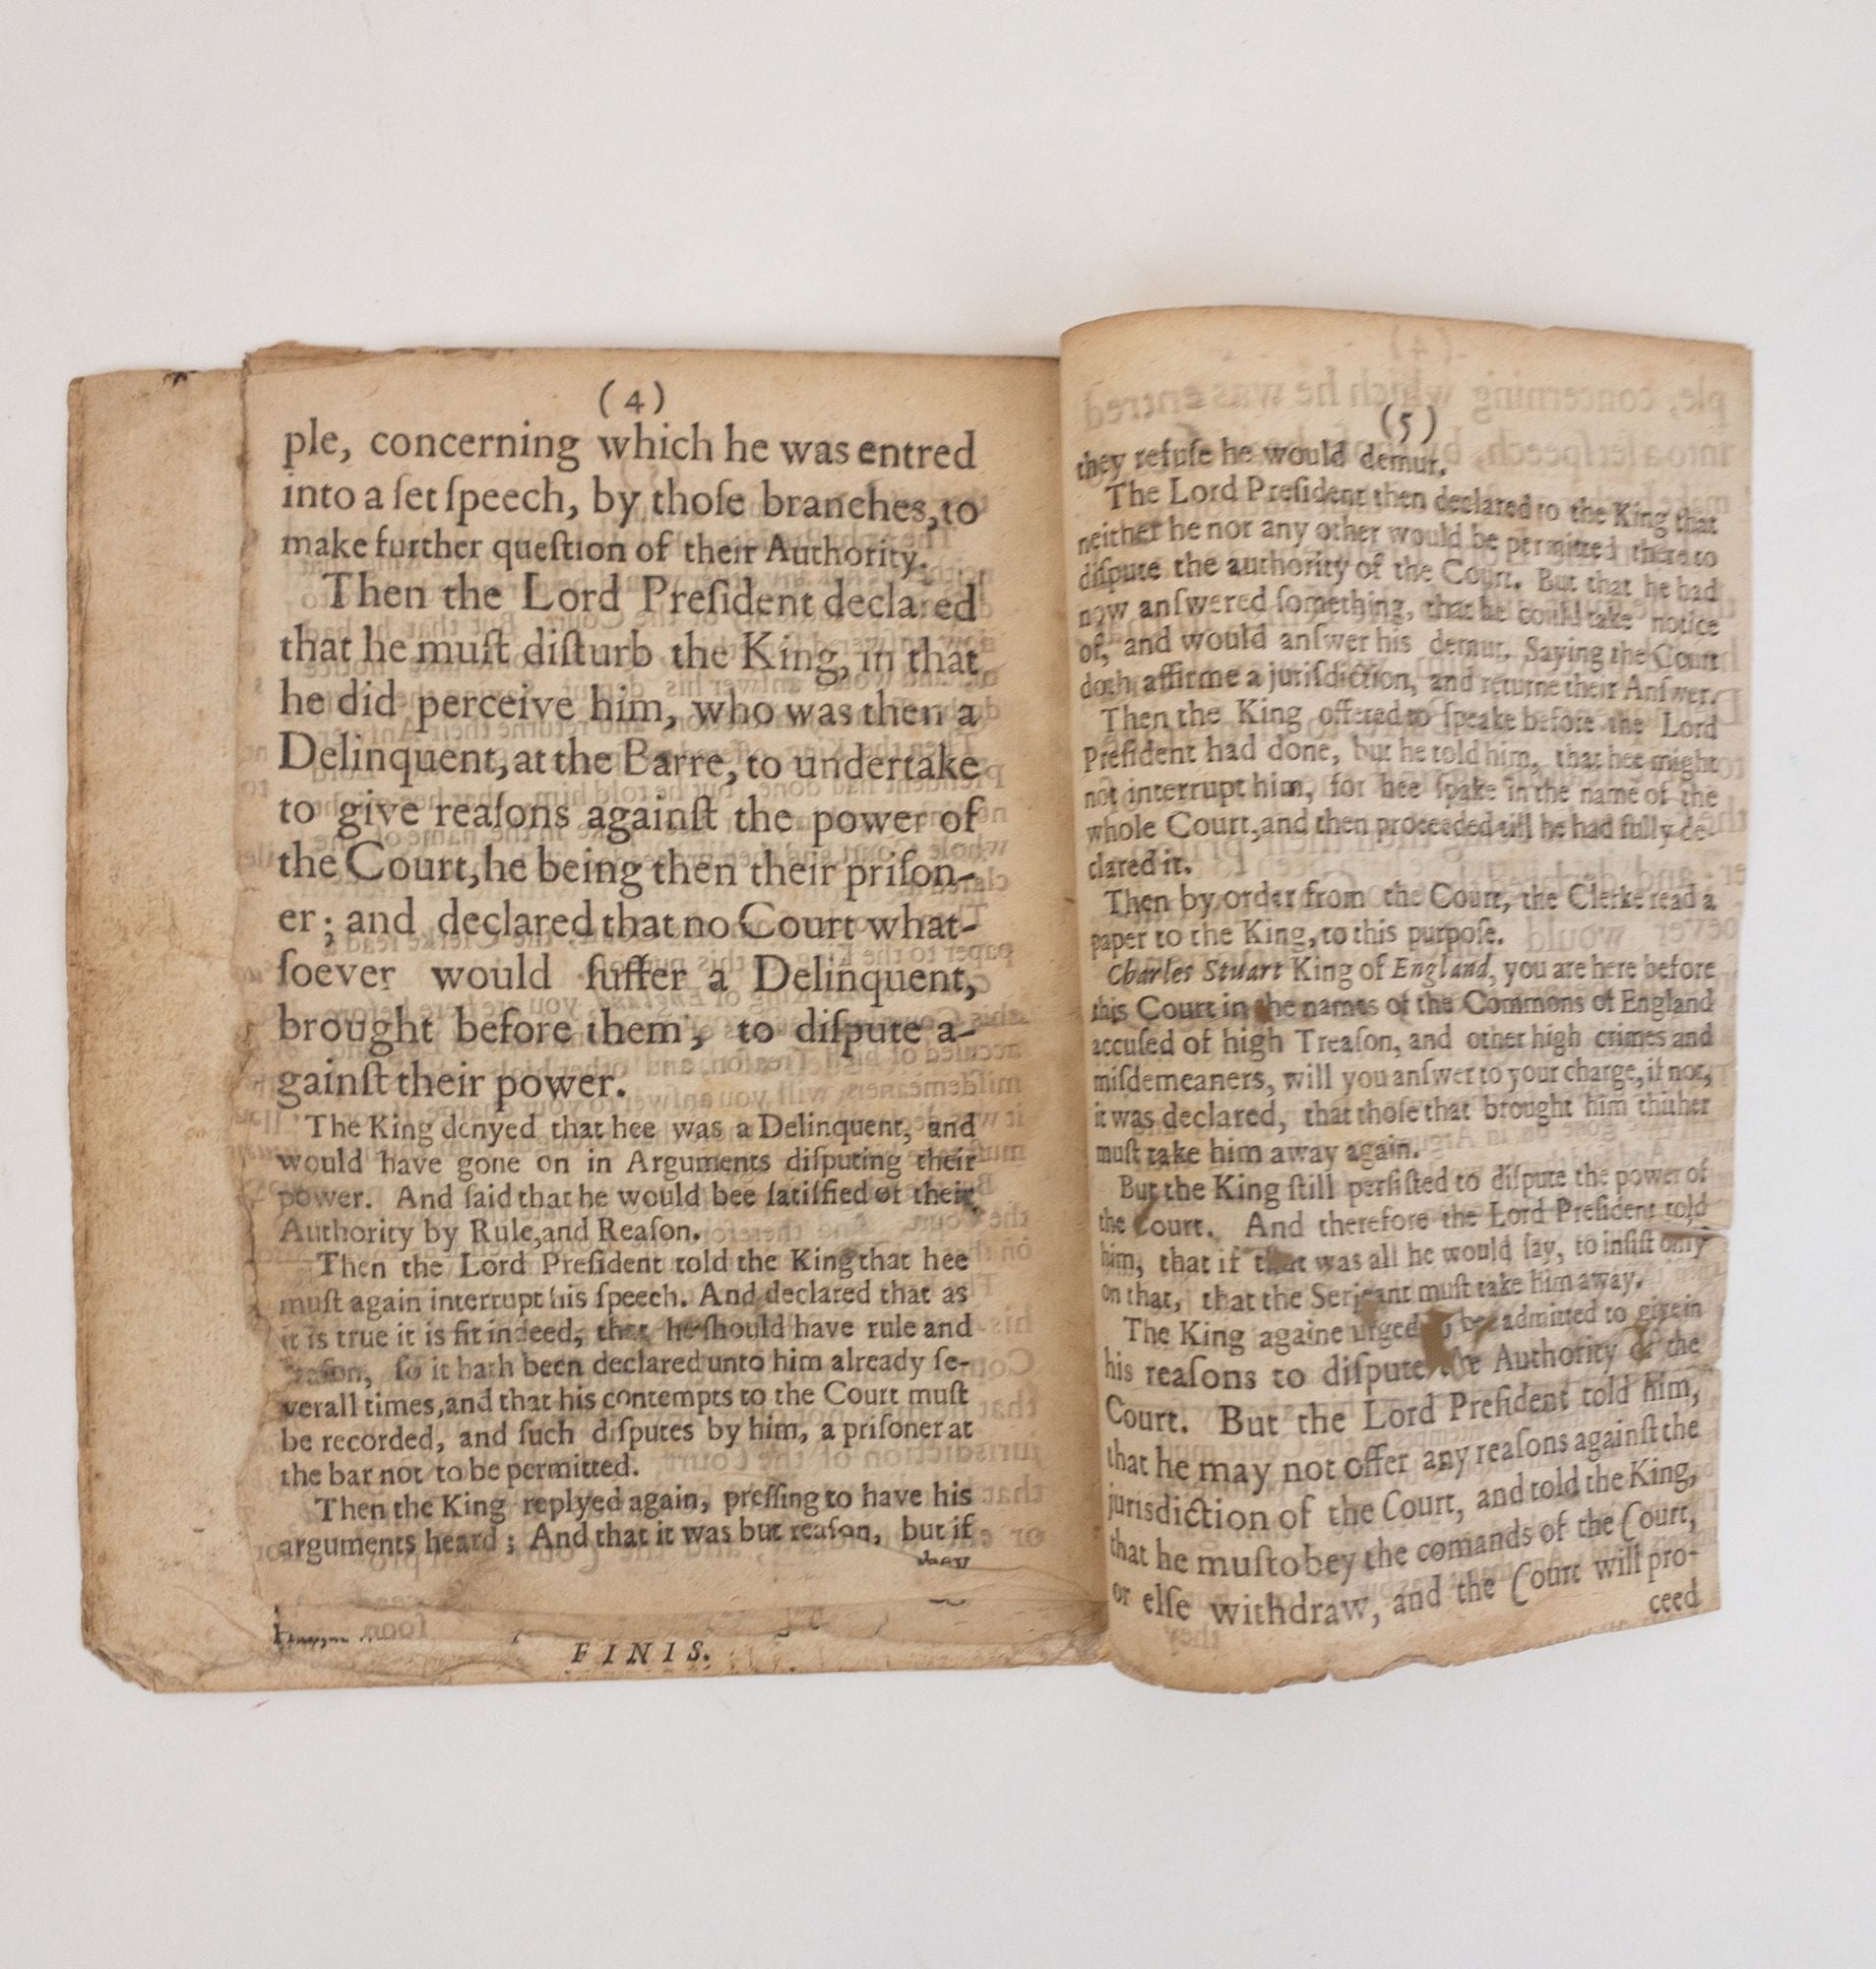 Product Image for A PERFECT NARRATIVE OF THE WHOLE PROCEEDINGS OF THE HIGH COURT OF IUSTICE IN THE TRYALL OF THE KING IN WESTMINSTER HALL; [Bound with] COLLECTIONS OF NOTES TAKEN AT THE KING'S TRYALL, AT WESTMINSTER HALL, ON MUNDAY LAST, JANUA. 22.1648. [Two Works Bound To